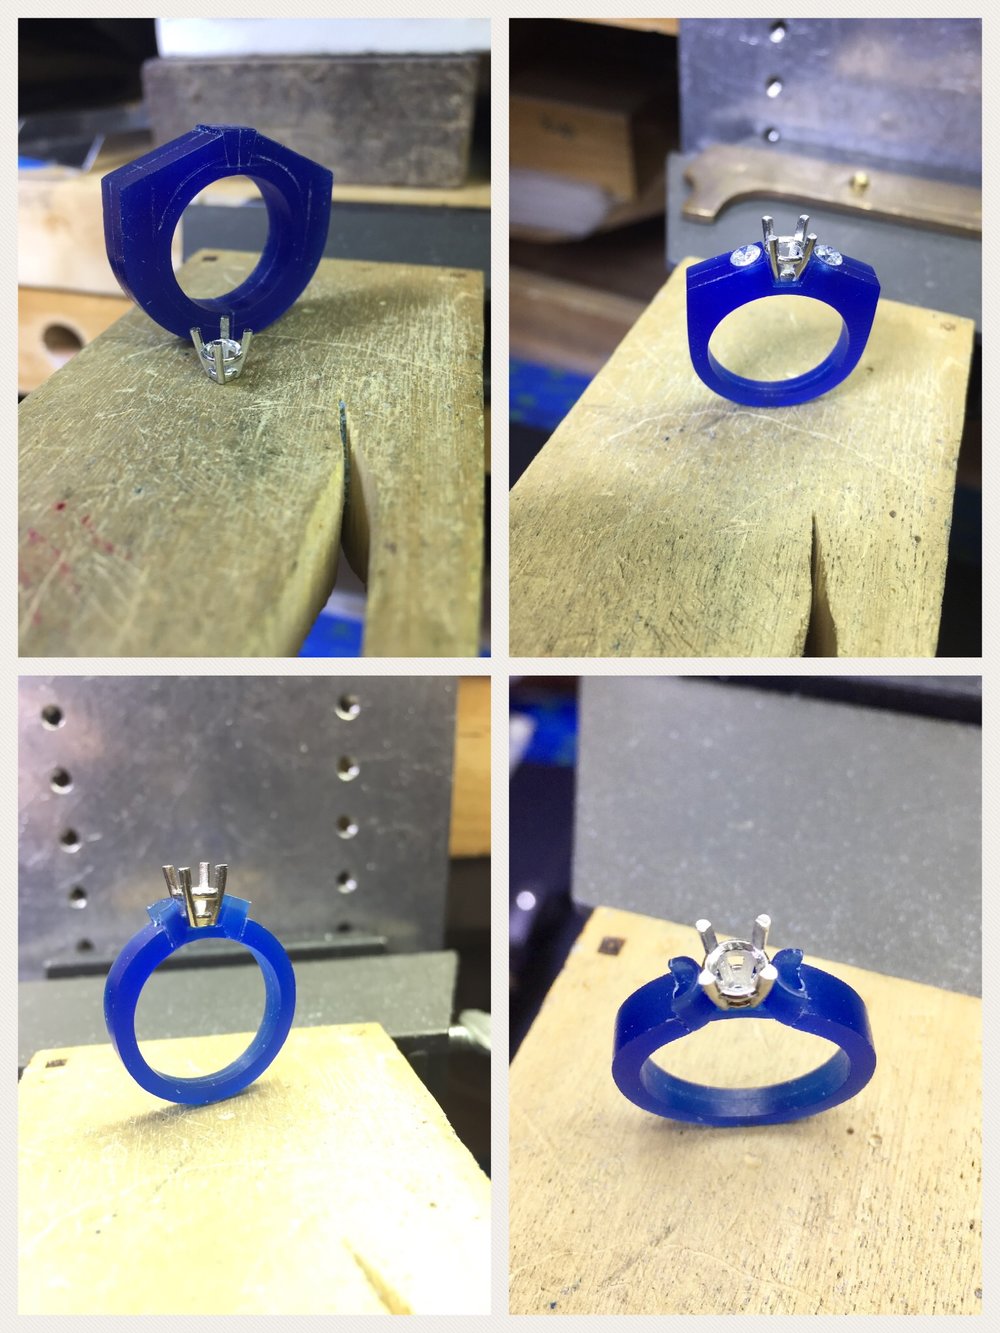 The next few steps include mapping out the placement of the side stones and determining the angles to be cut out for the center stone setting (head). Then the semi-bezels are created and we shape the shank (band) portion of the ring to blend it in with the other elements of the design.